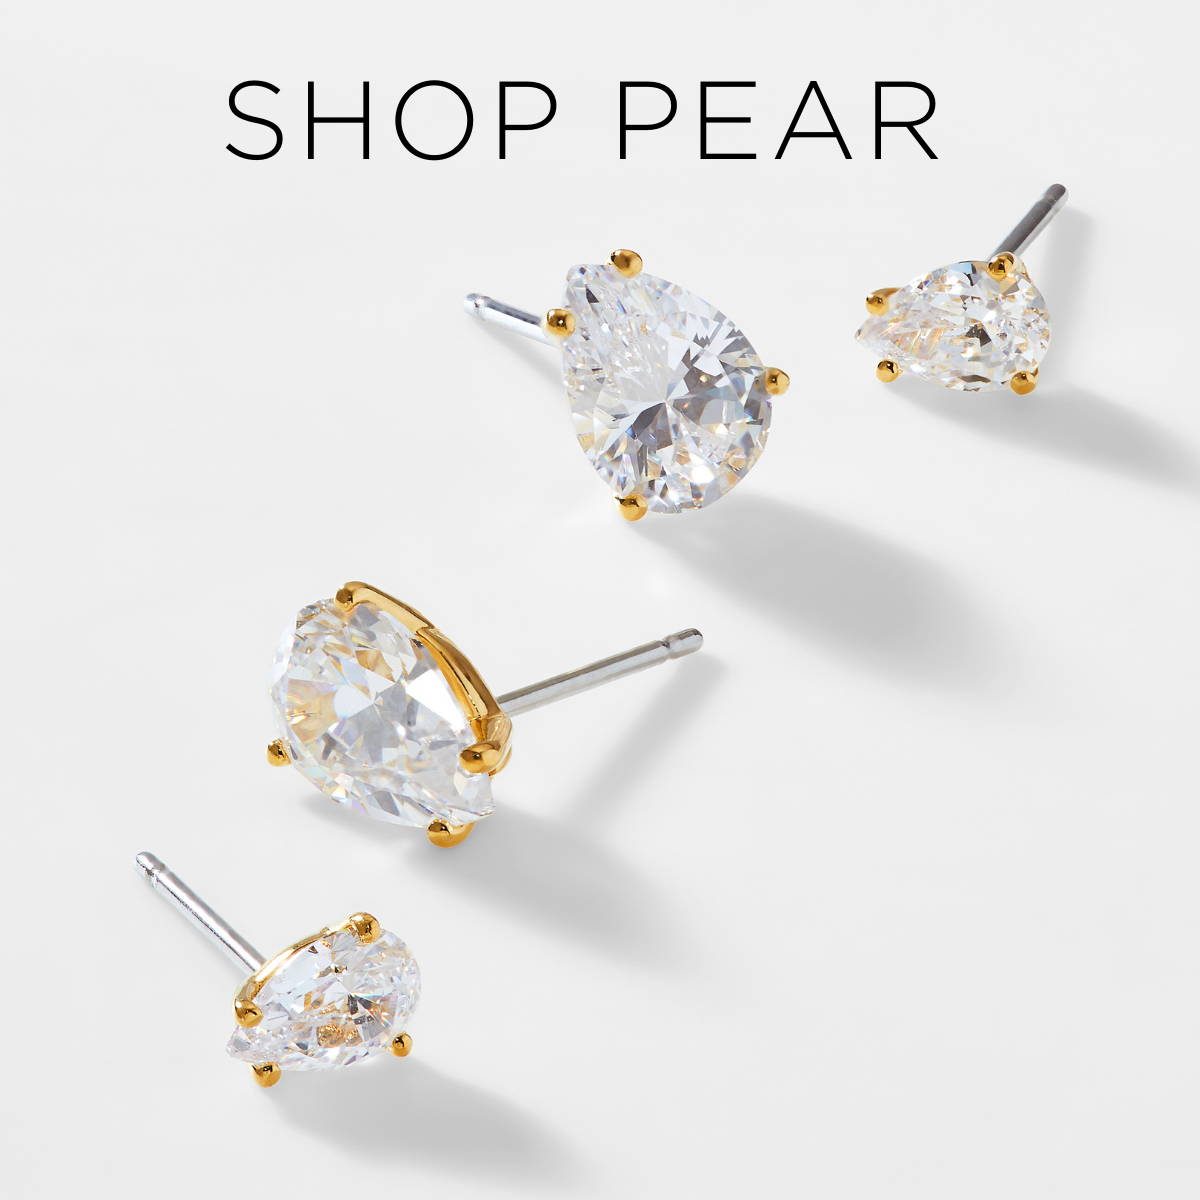 Click to shop pear stone styles